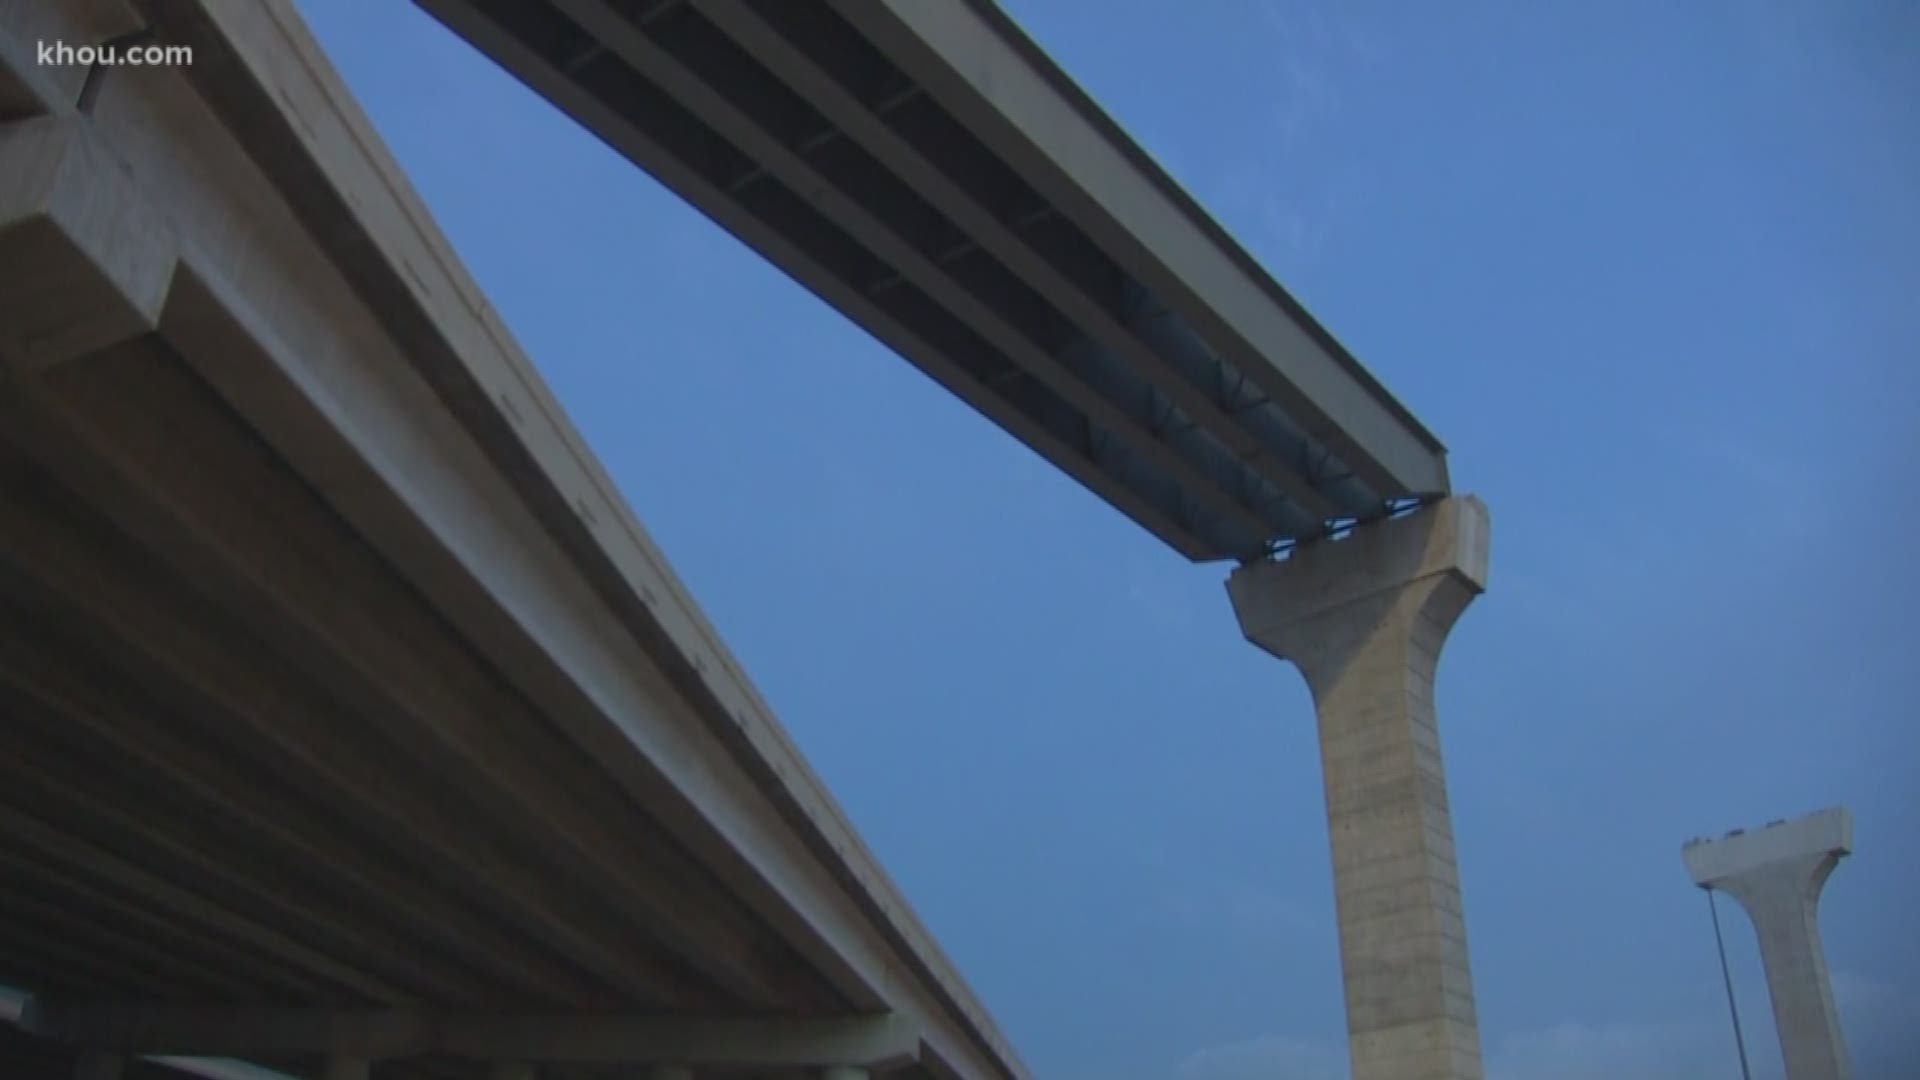 A construction worker died after he fell from the Beltway 8 overpass near Highway 288 early Friday.